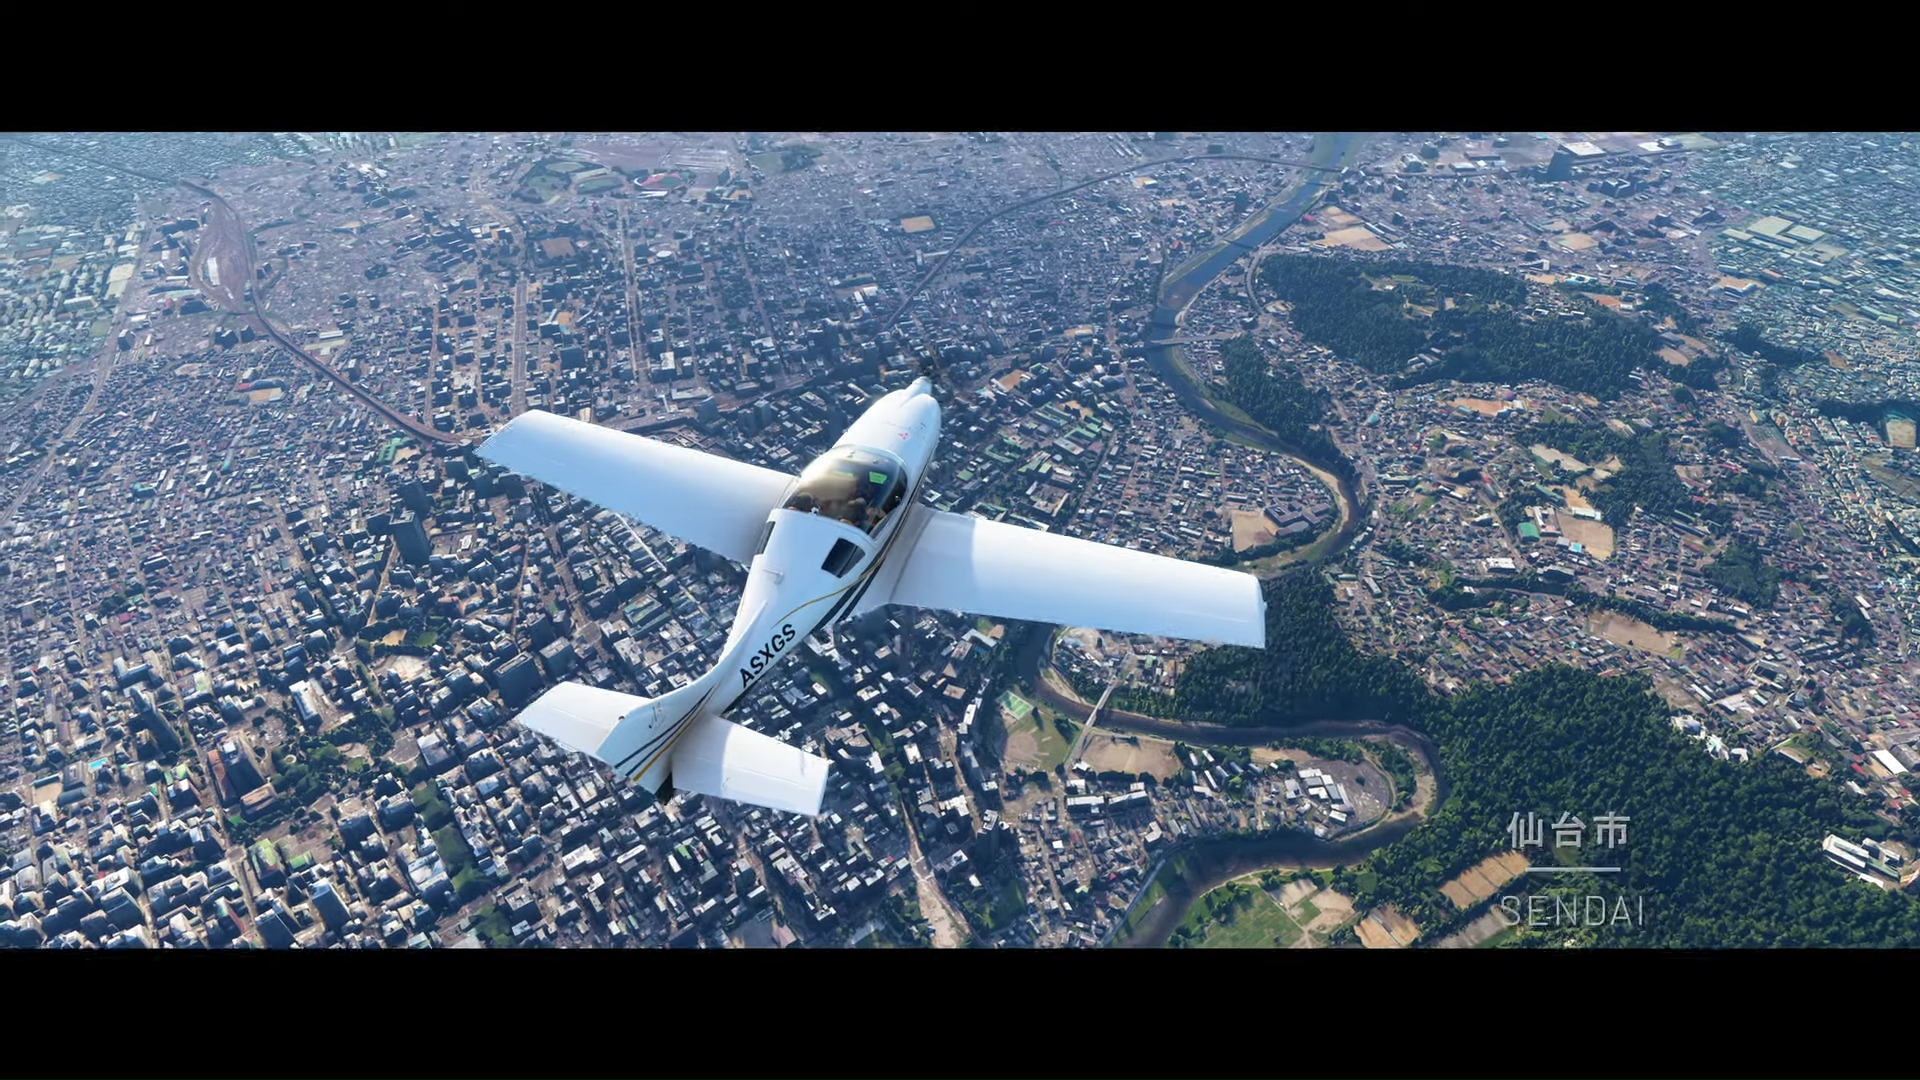 Microsoft Flight Simulator’s New Japan Update Covers The Entire Country And It Looks Amazing